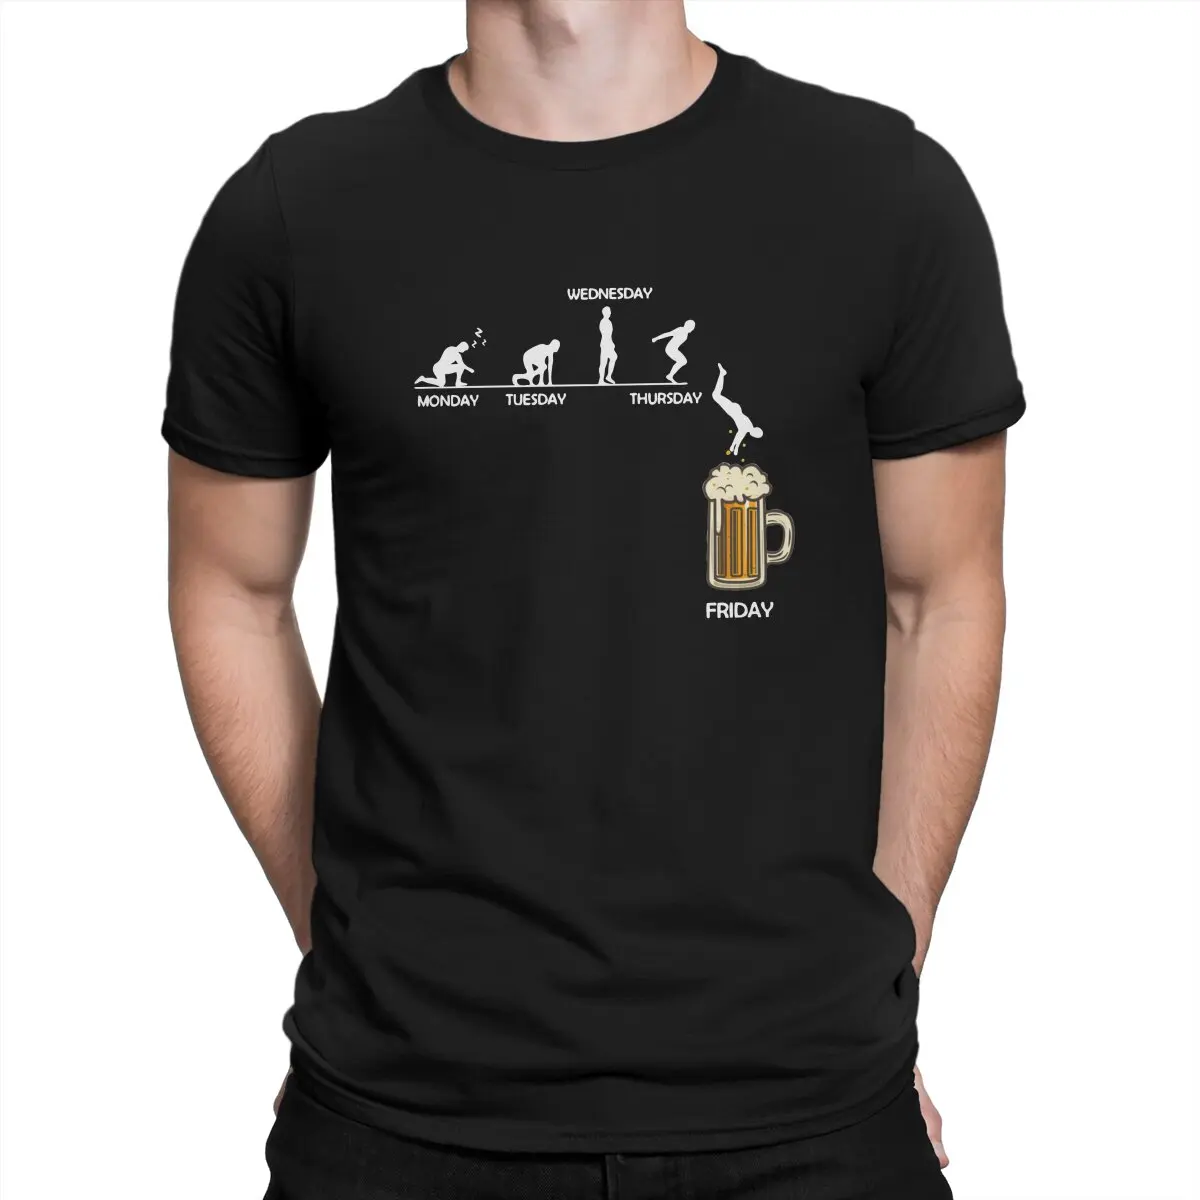 

Men's T-Shirts Jumping into the Beer Friday Evolution Vintage Tee Shirt Short Sleeve Beer T Shirt Crewneck Clothes Gift Idea